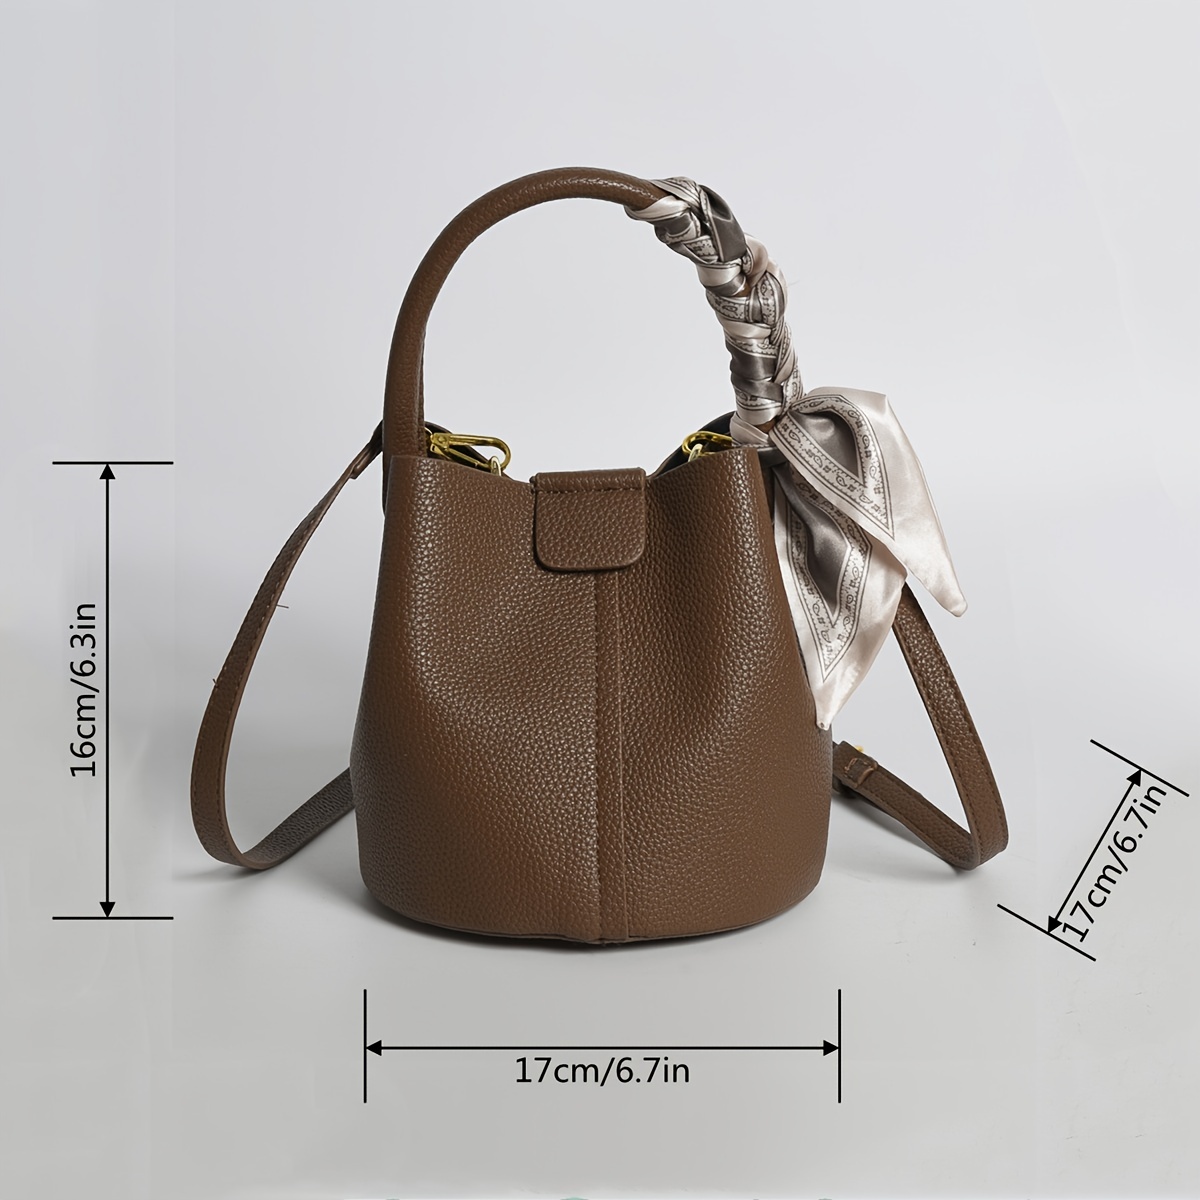 Litchi Embossed Square Bag Khaki Flap Top Handle For Work